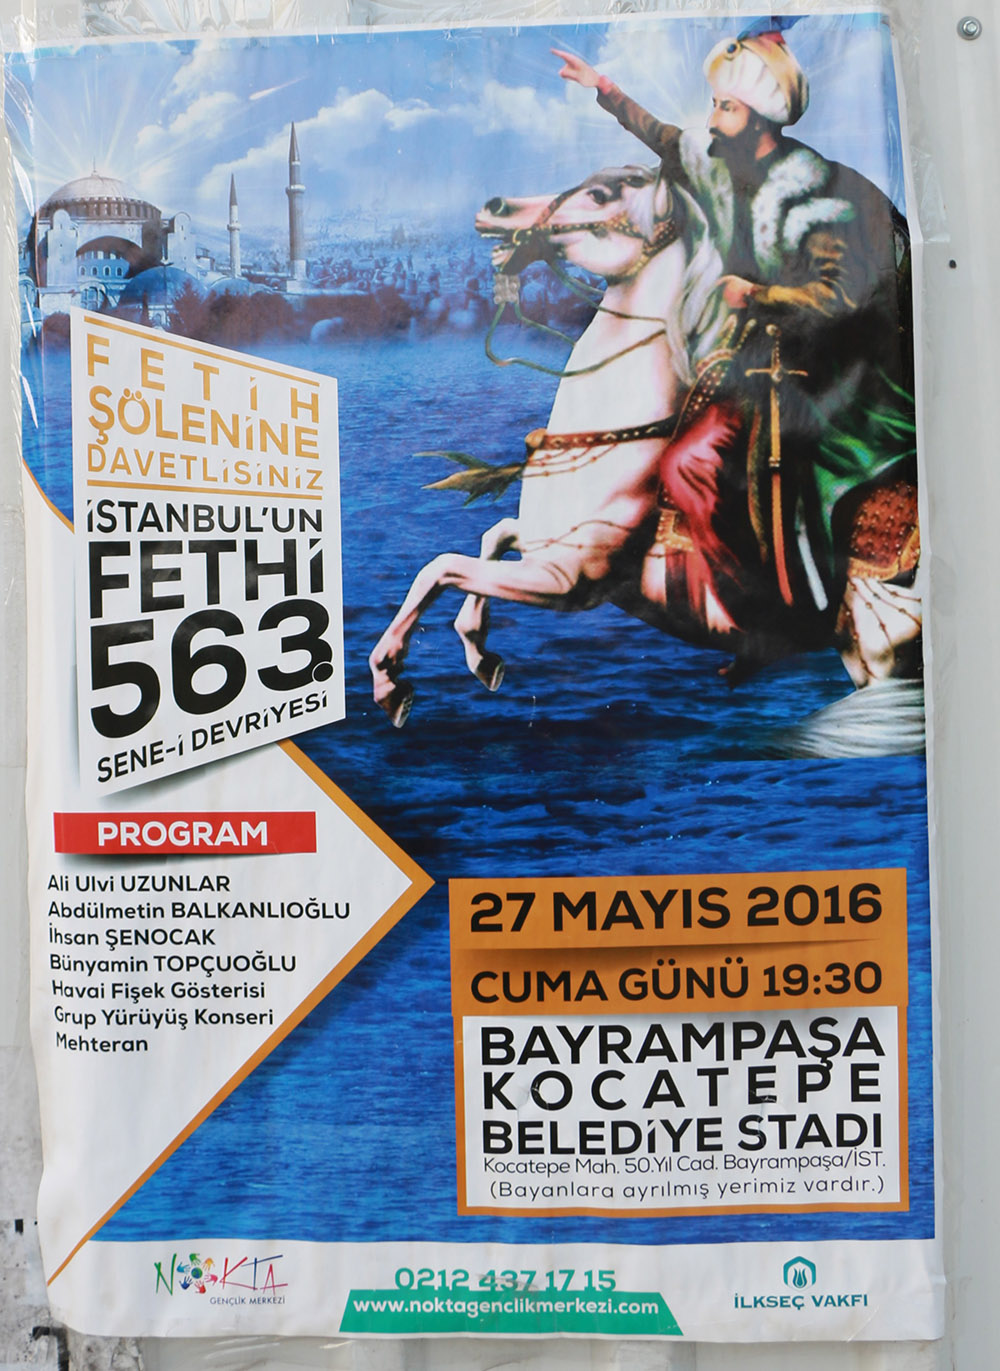 Poster Announcing the 563rd Celebration of the Fall of Constantinople